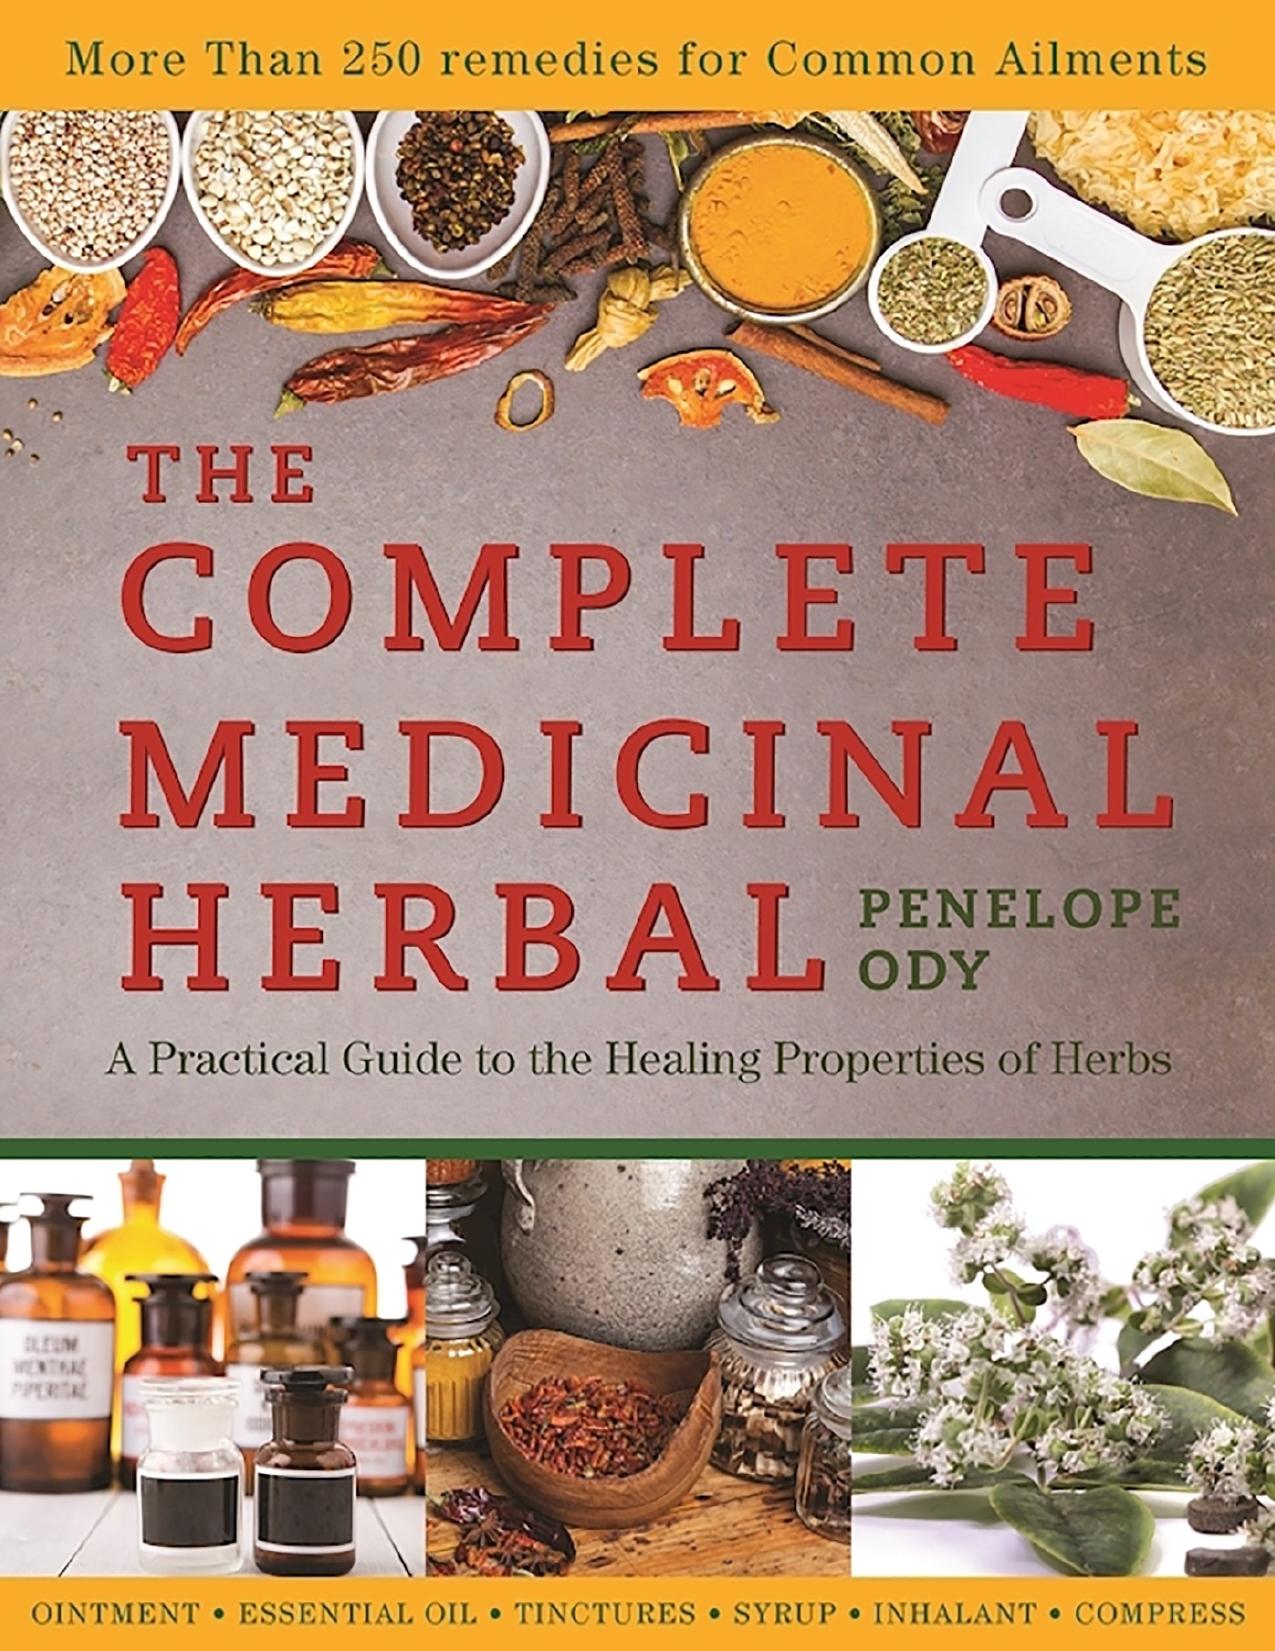 The complete medicinal herbal : a practical guide to the healing properties of herbs - PDFDrive.com